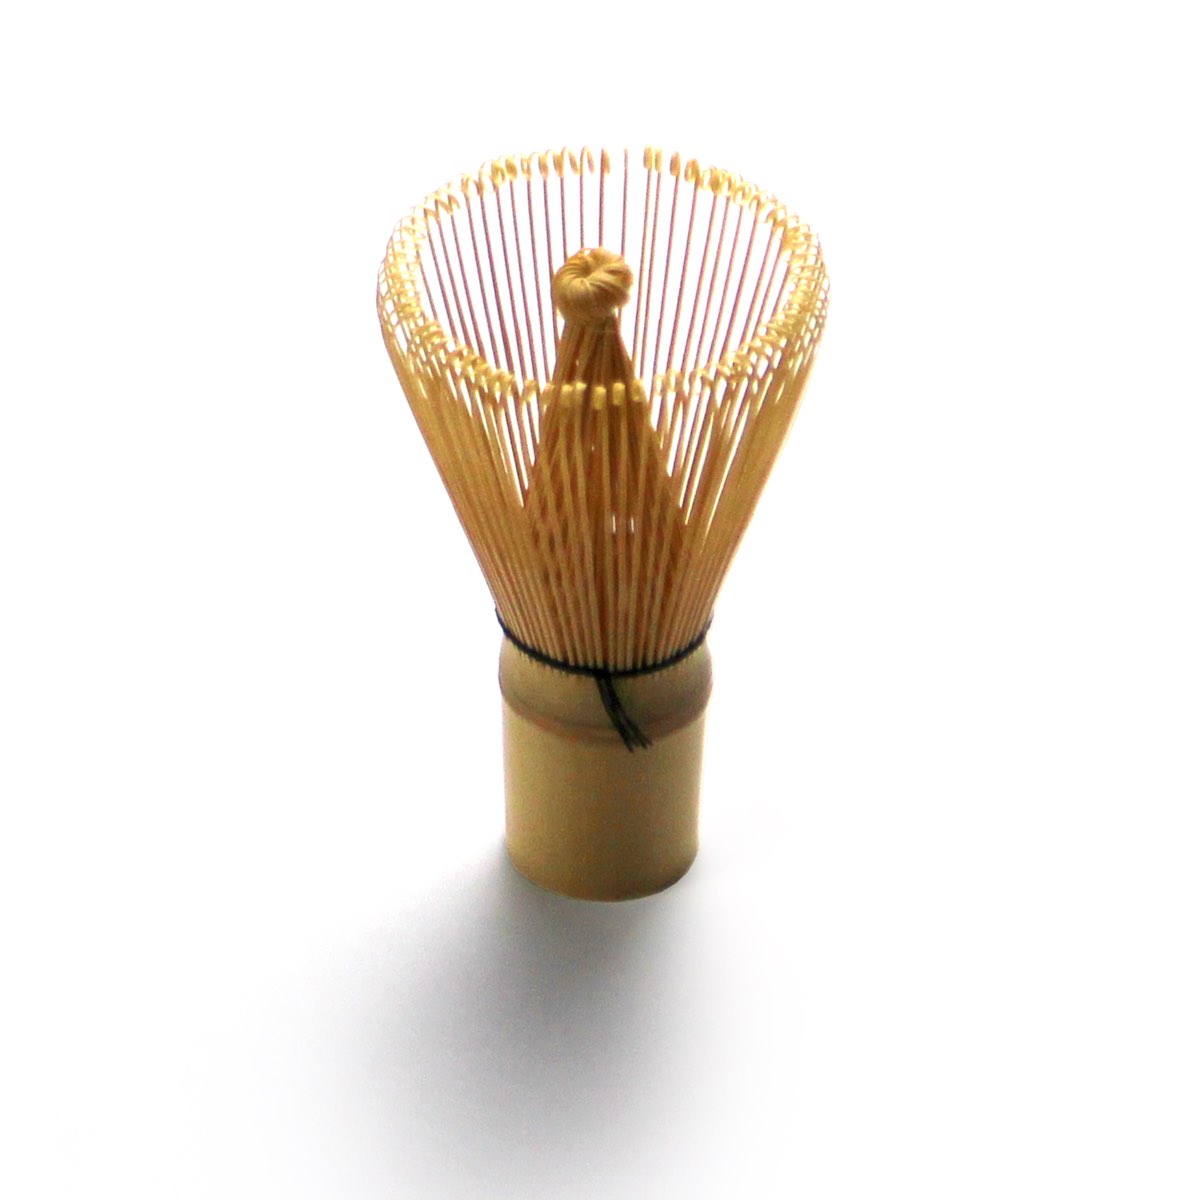 Matcha Whisk (“Chasen”)Matcha Whisk (“Chasen”)Who Are We?CONTACT